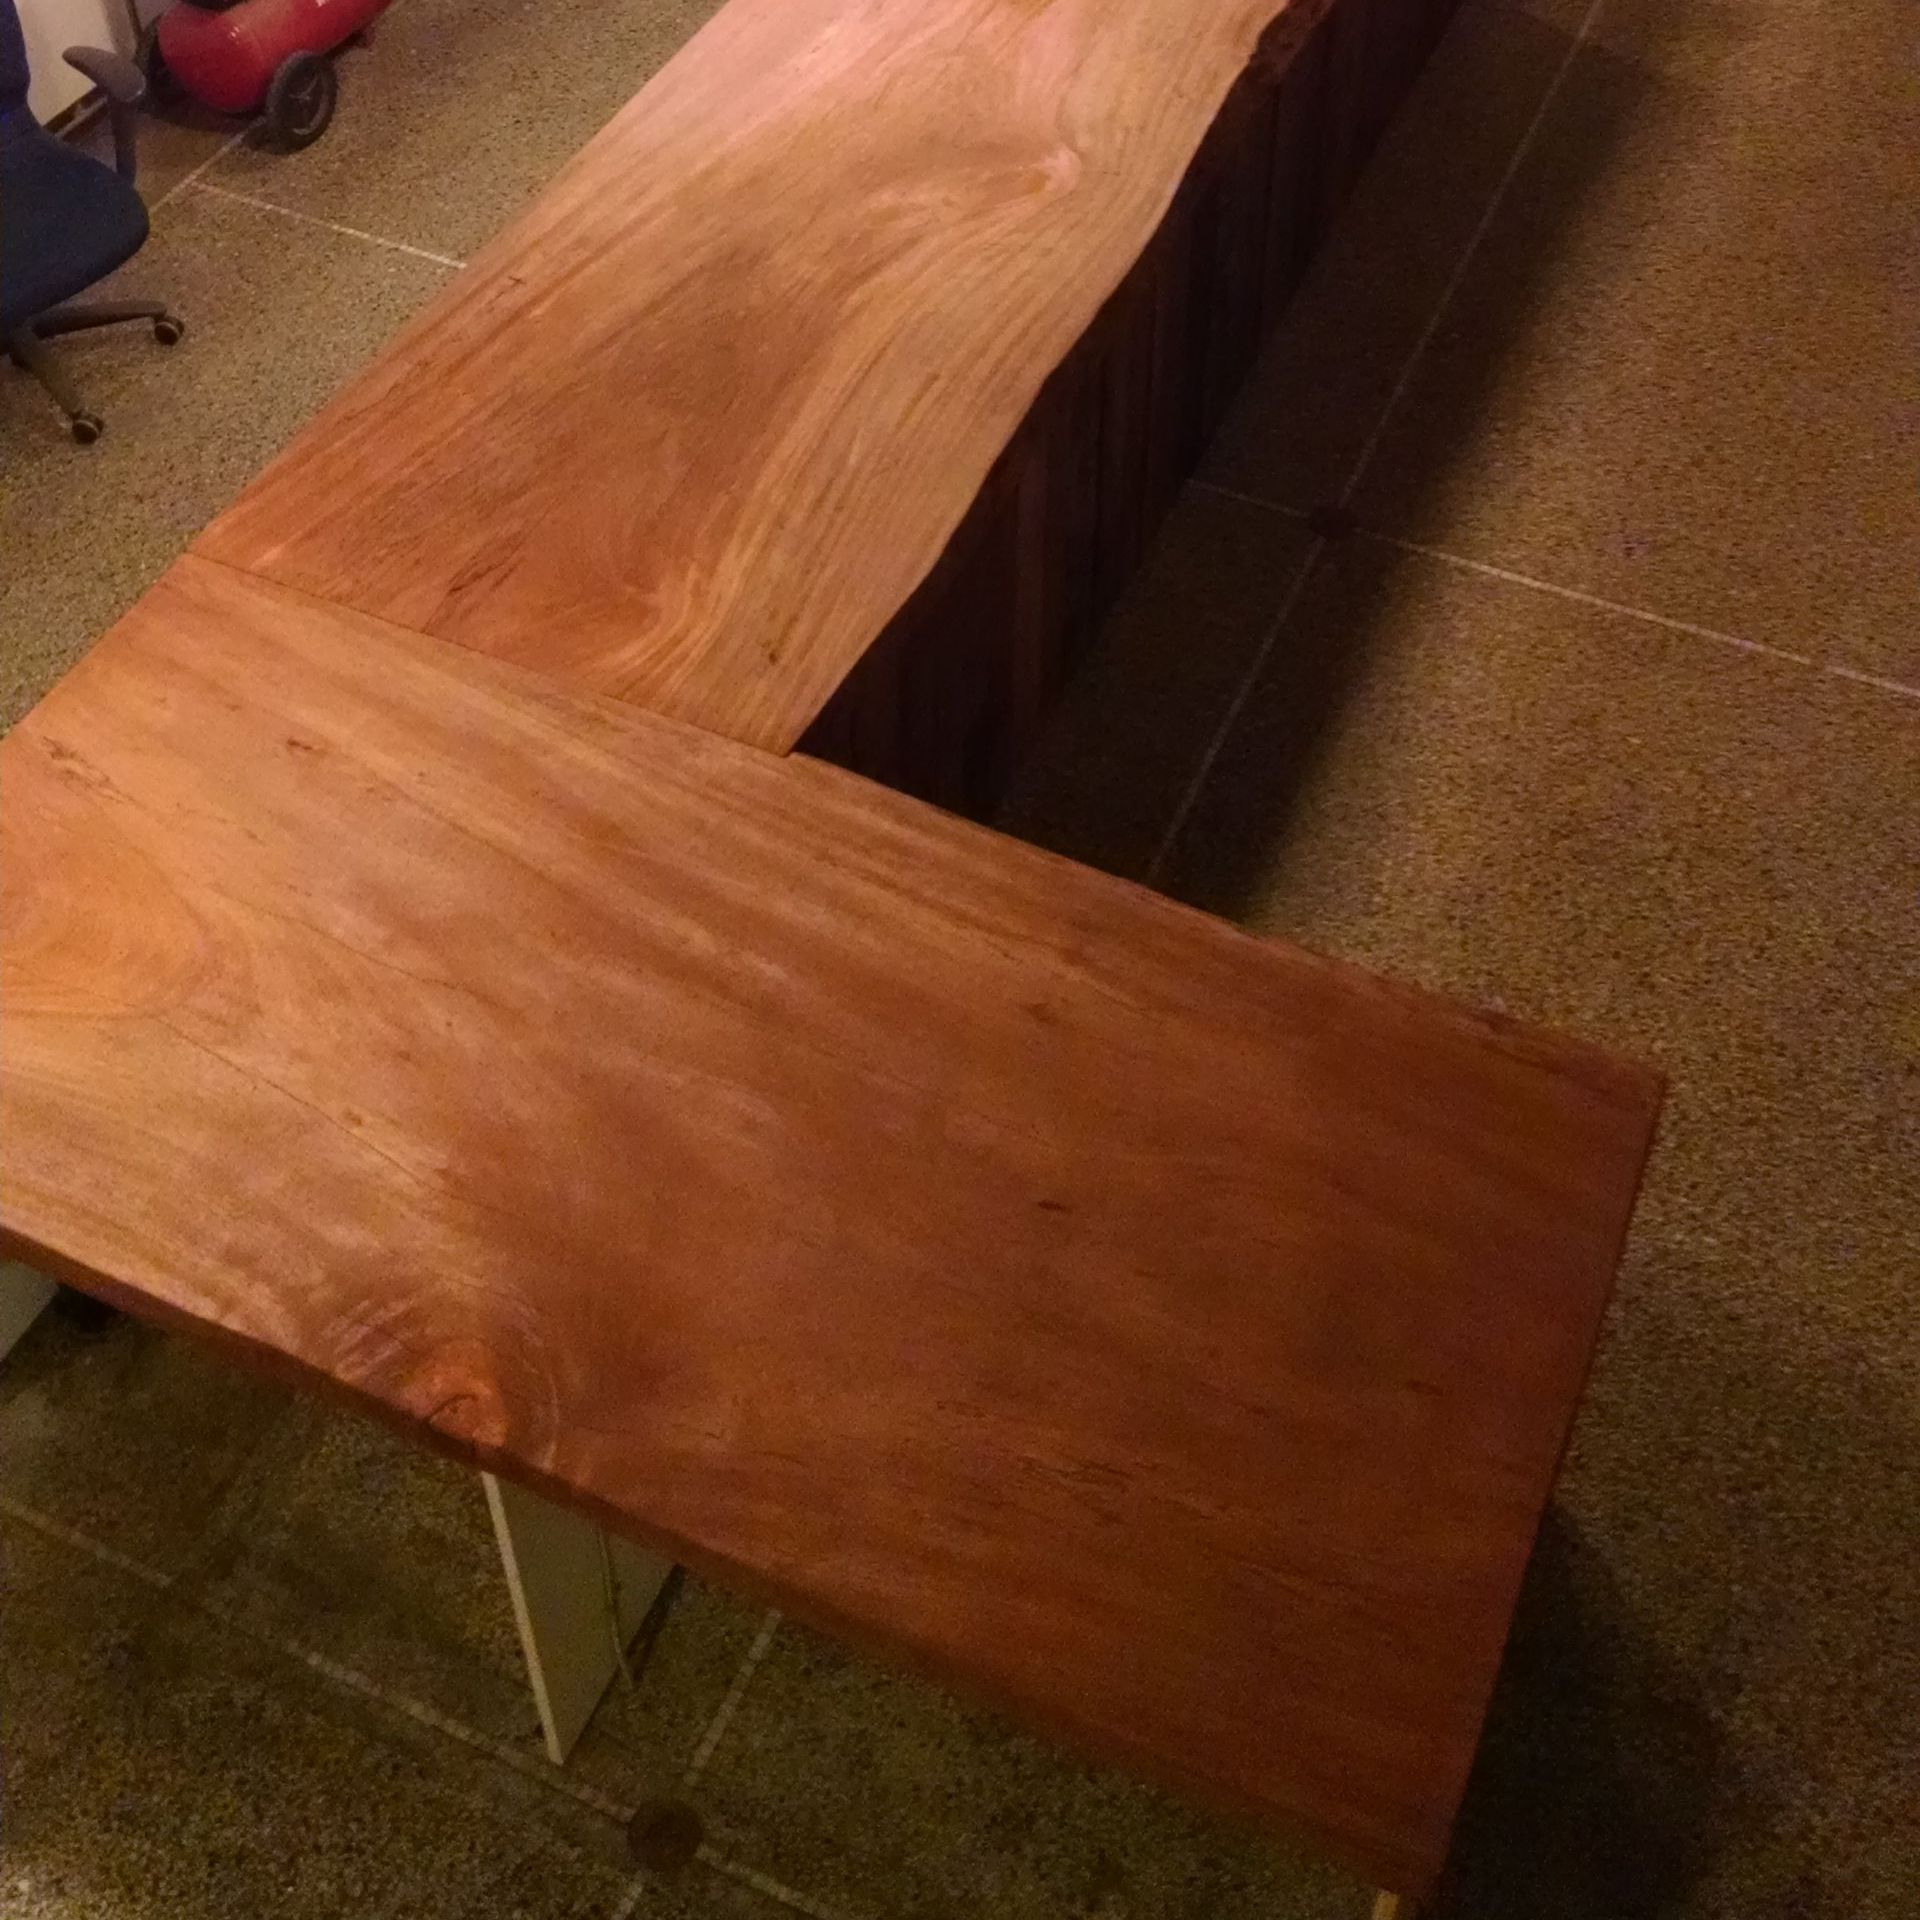 A repurposed wooden table with a chair in the background